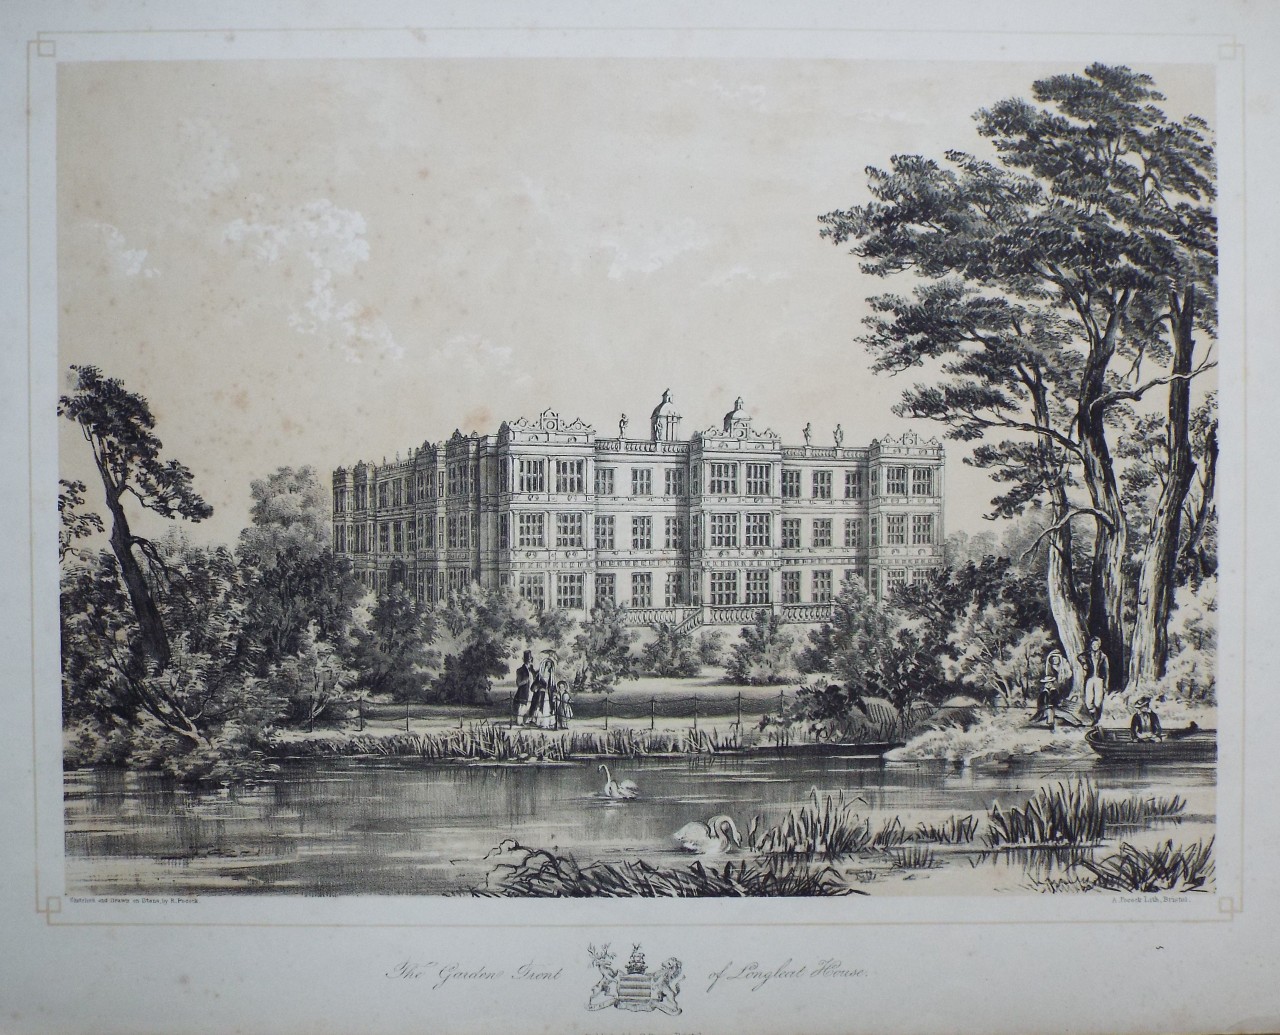 Lithograph - The Garden Front of Longleat House. - Pocock